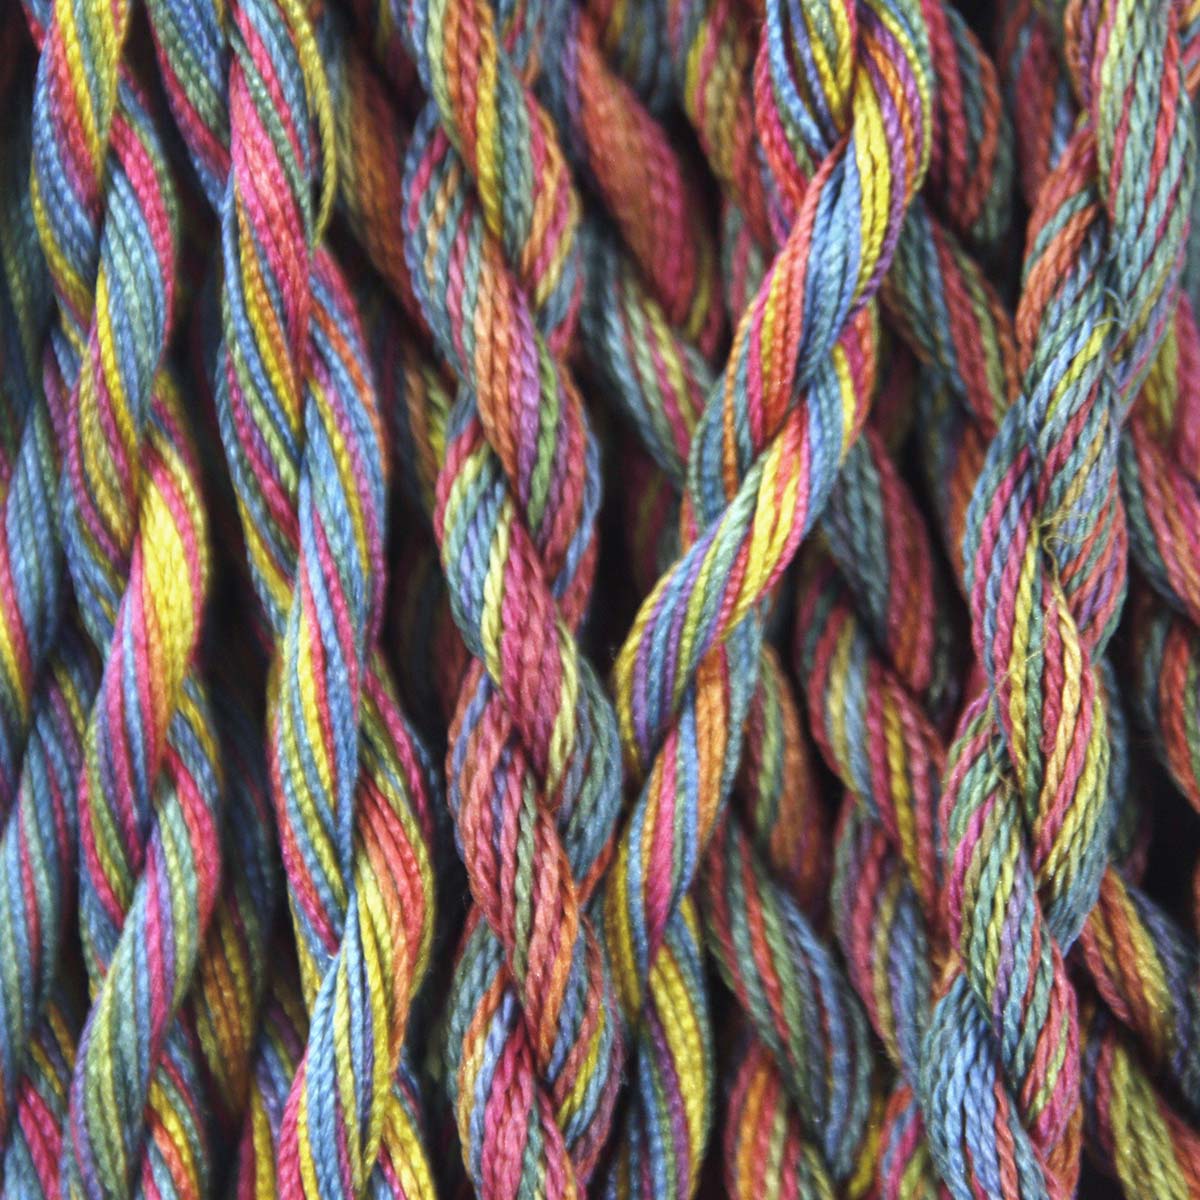 www.colourstreams.com.au Colour Streams Hand Dyed Silk Threads Silken Strands Ophir Exotic Lights Aurora Slow Stitch Embroidery Textile Arts Fibre DL 15 Marrakesh Yellows Reds Purples Pinks Green Blues